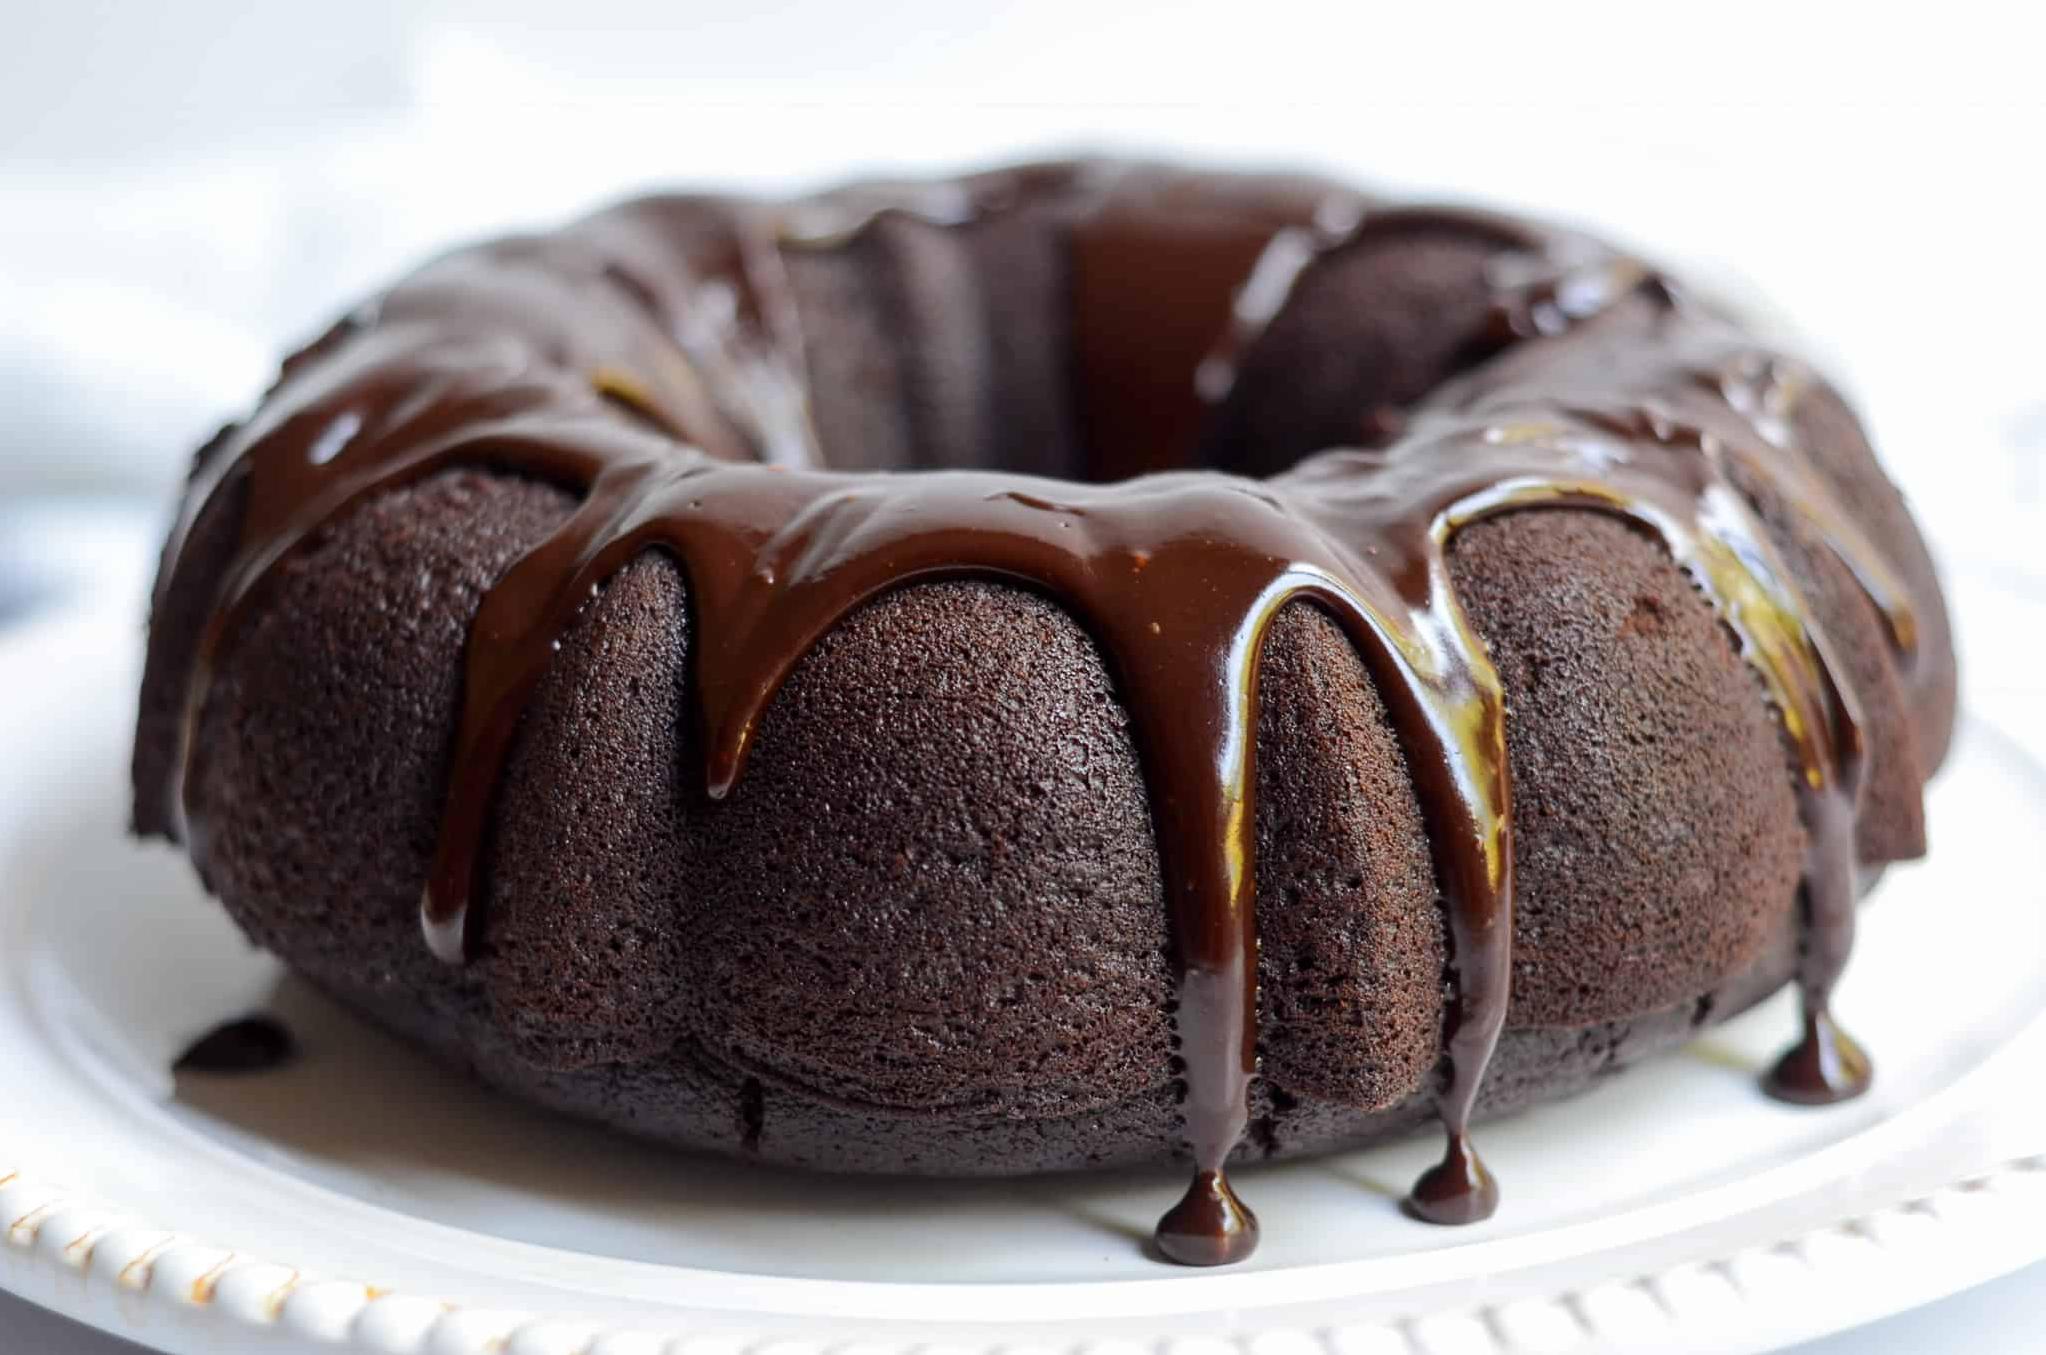  Be prepared to have your taste buds blown away with each moist and chocolatey bite.